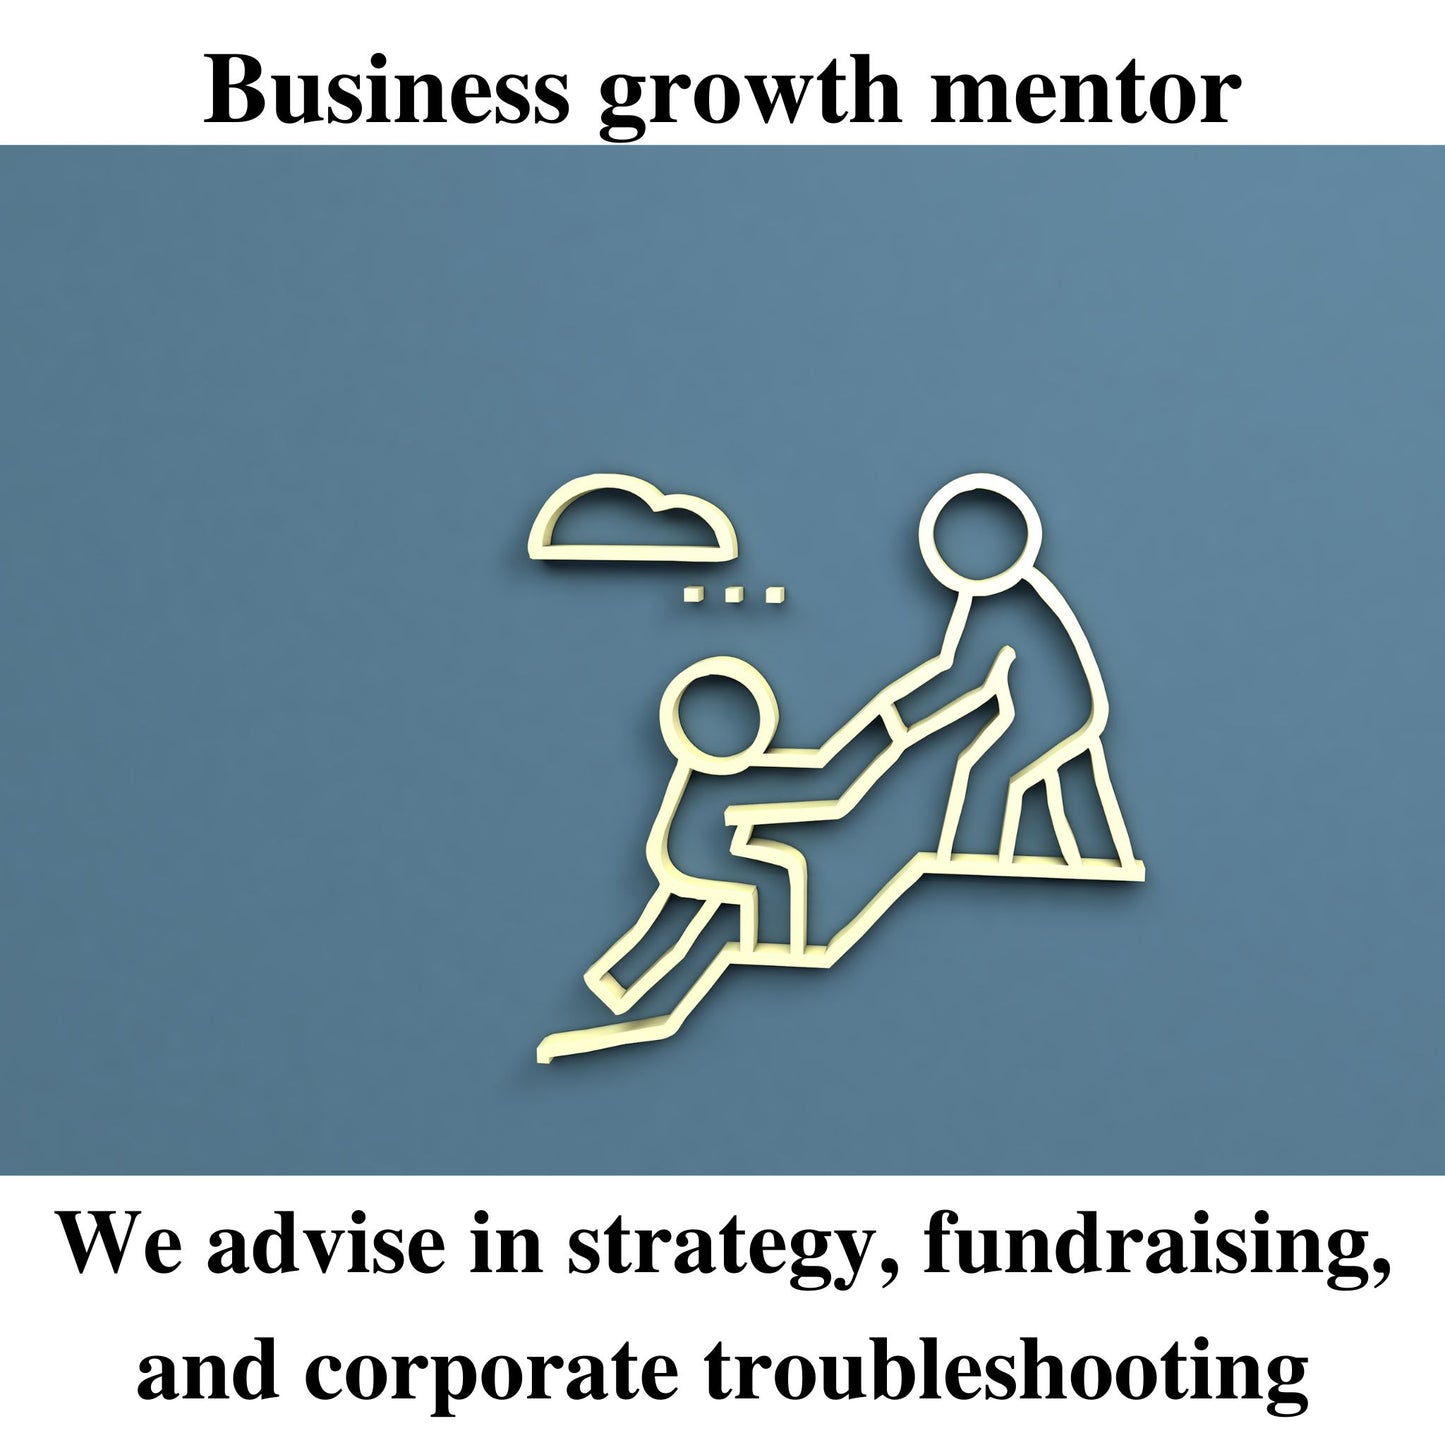 We advise in strategy, fundraising, and corporate troubleshooting.